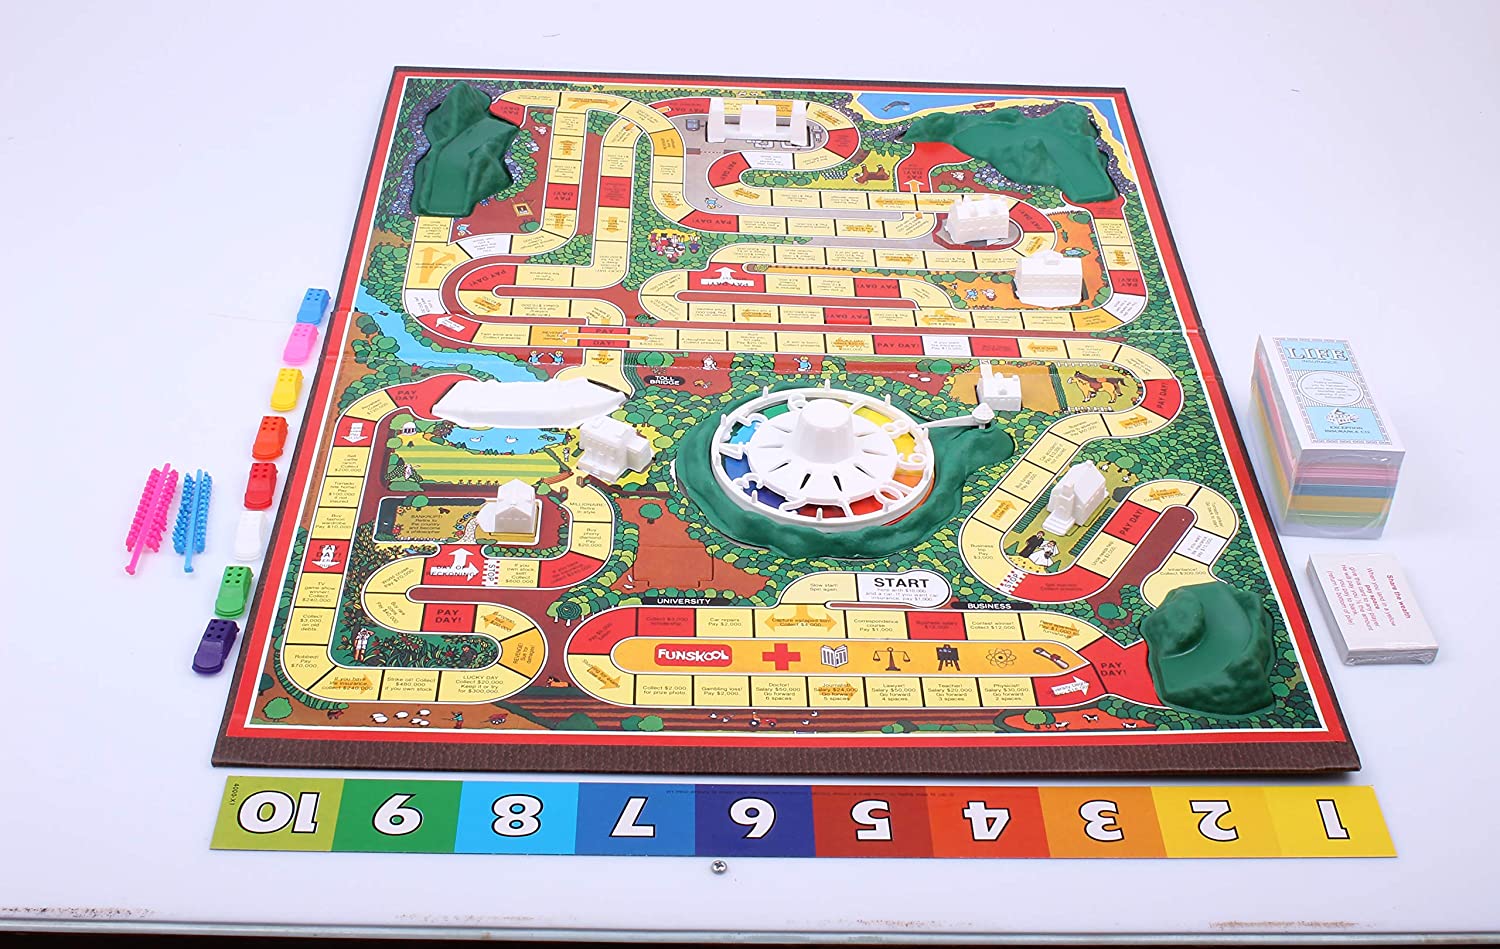 the game of life board game